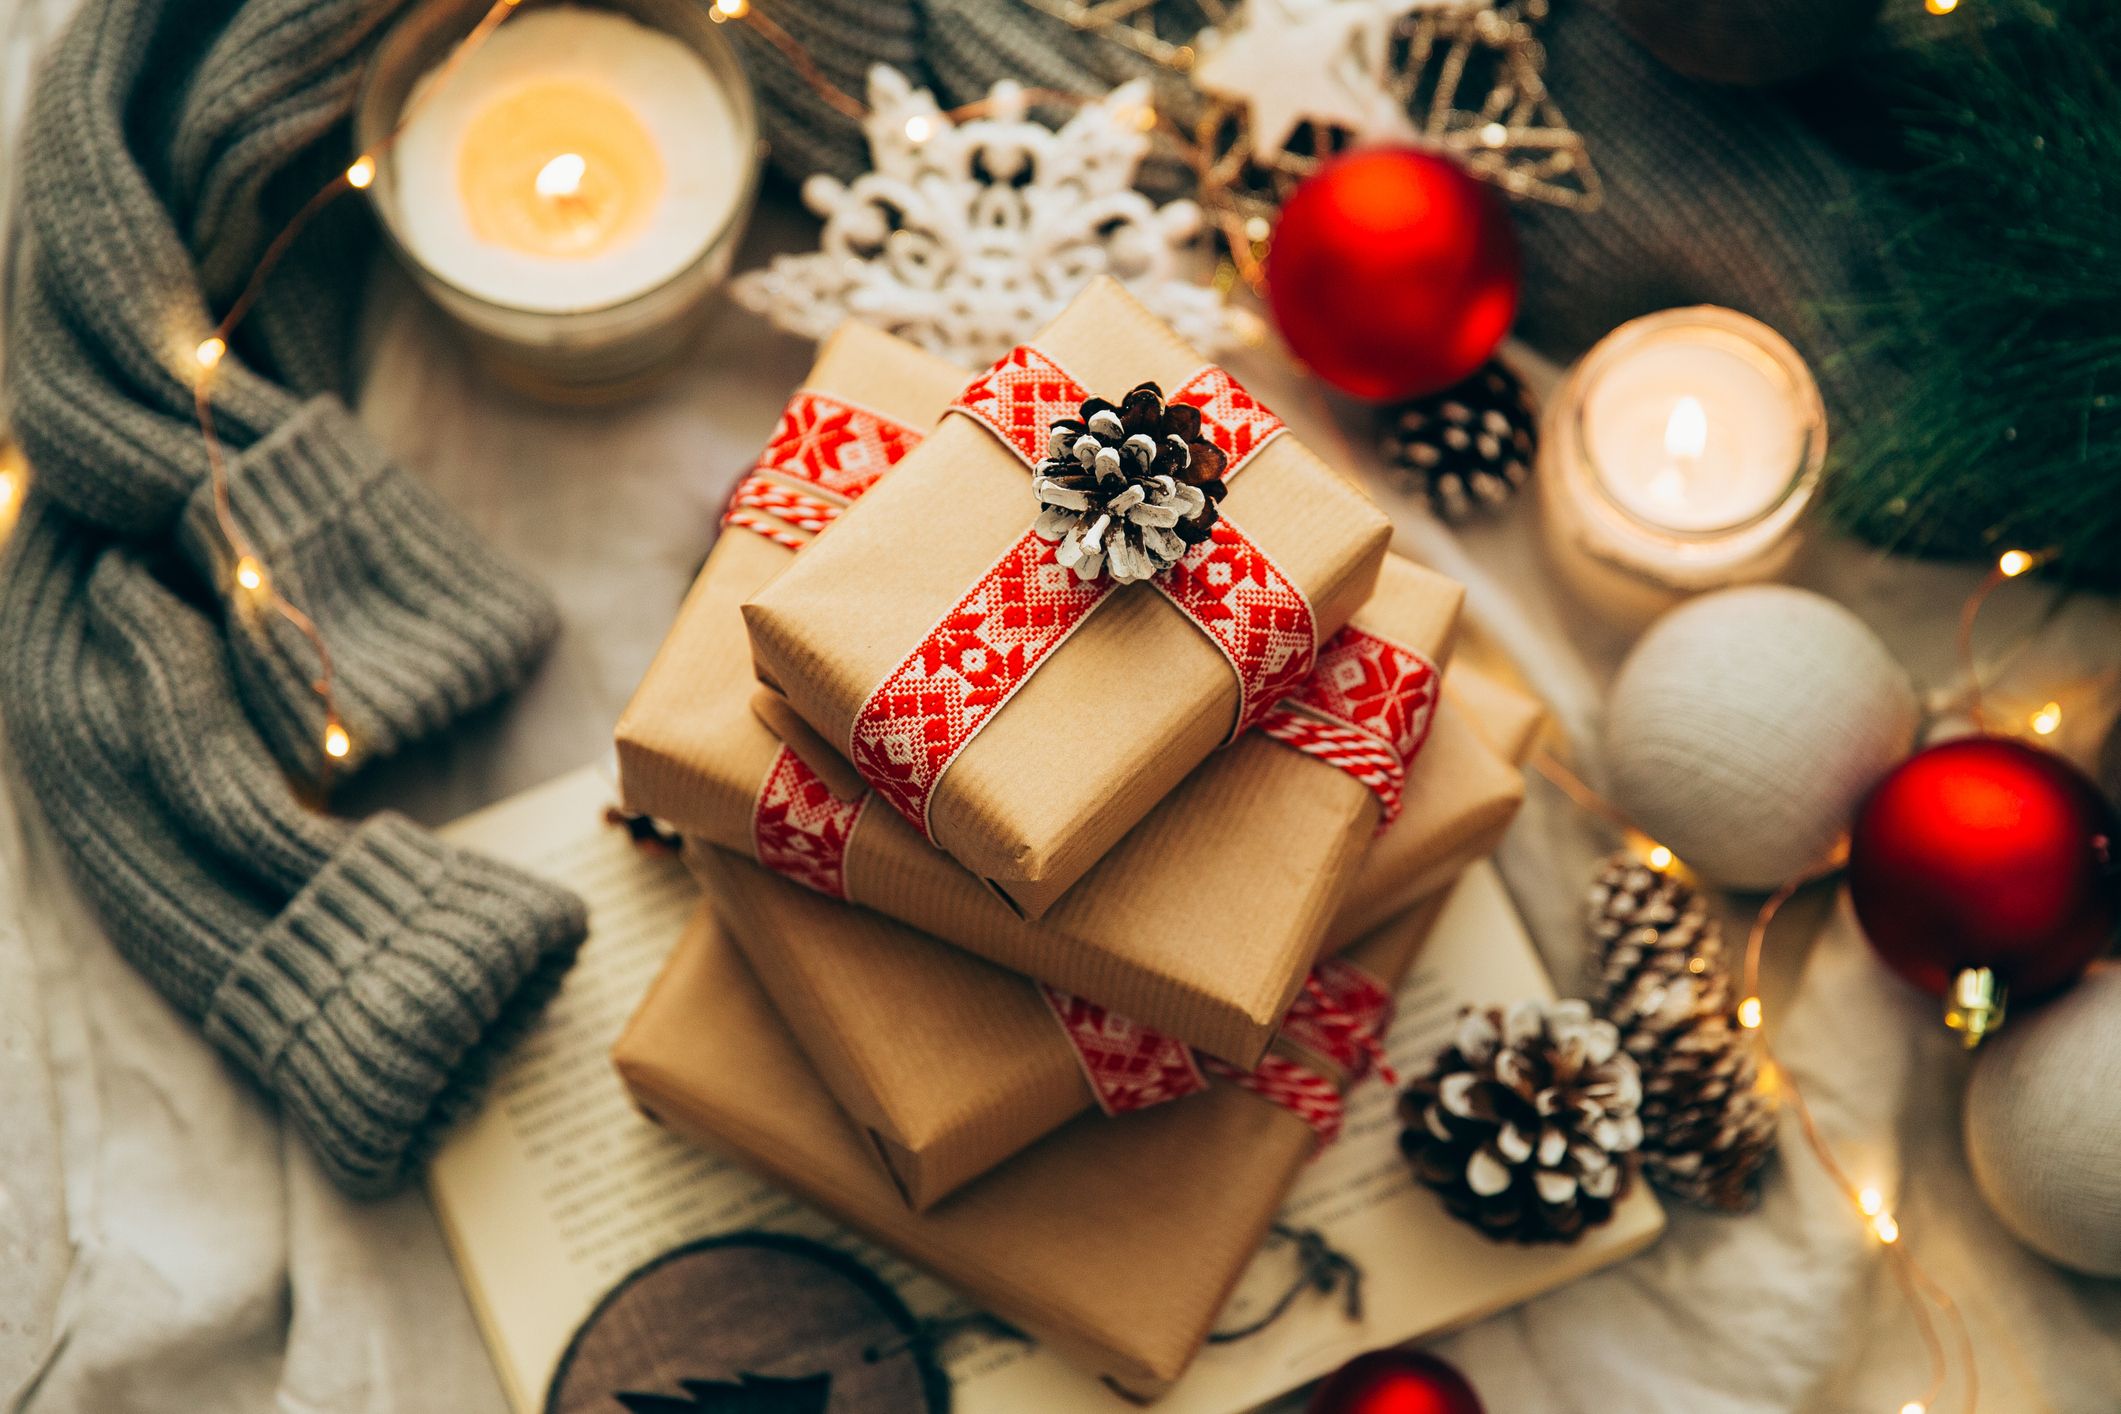 25 Best Christmas Trivia Questions - Holiday Fun Facts and Questions